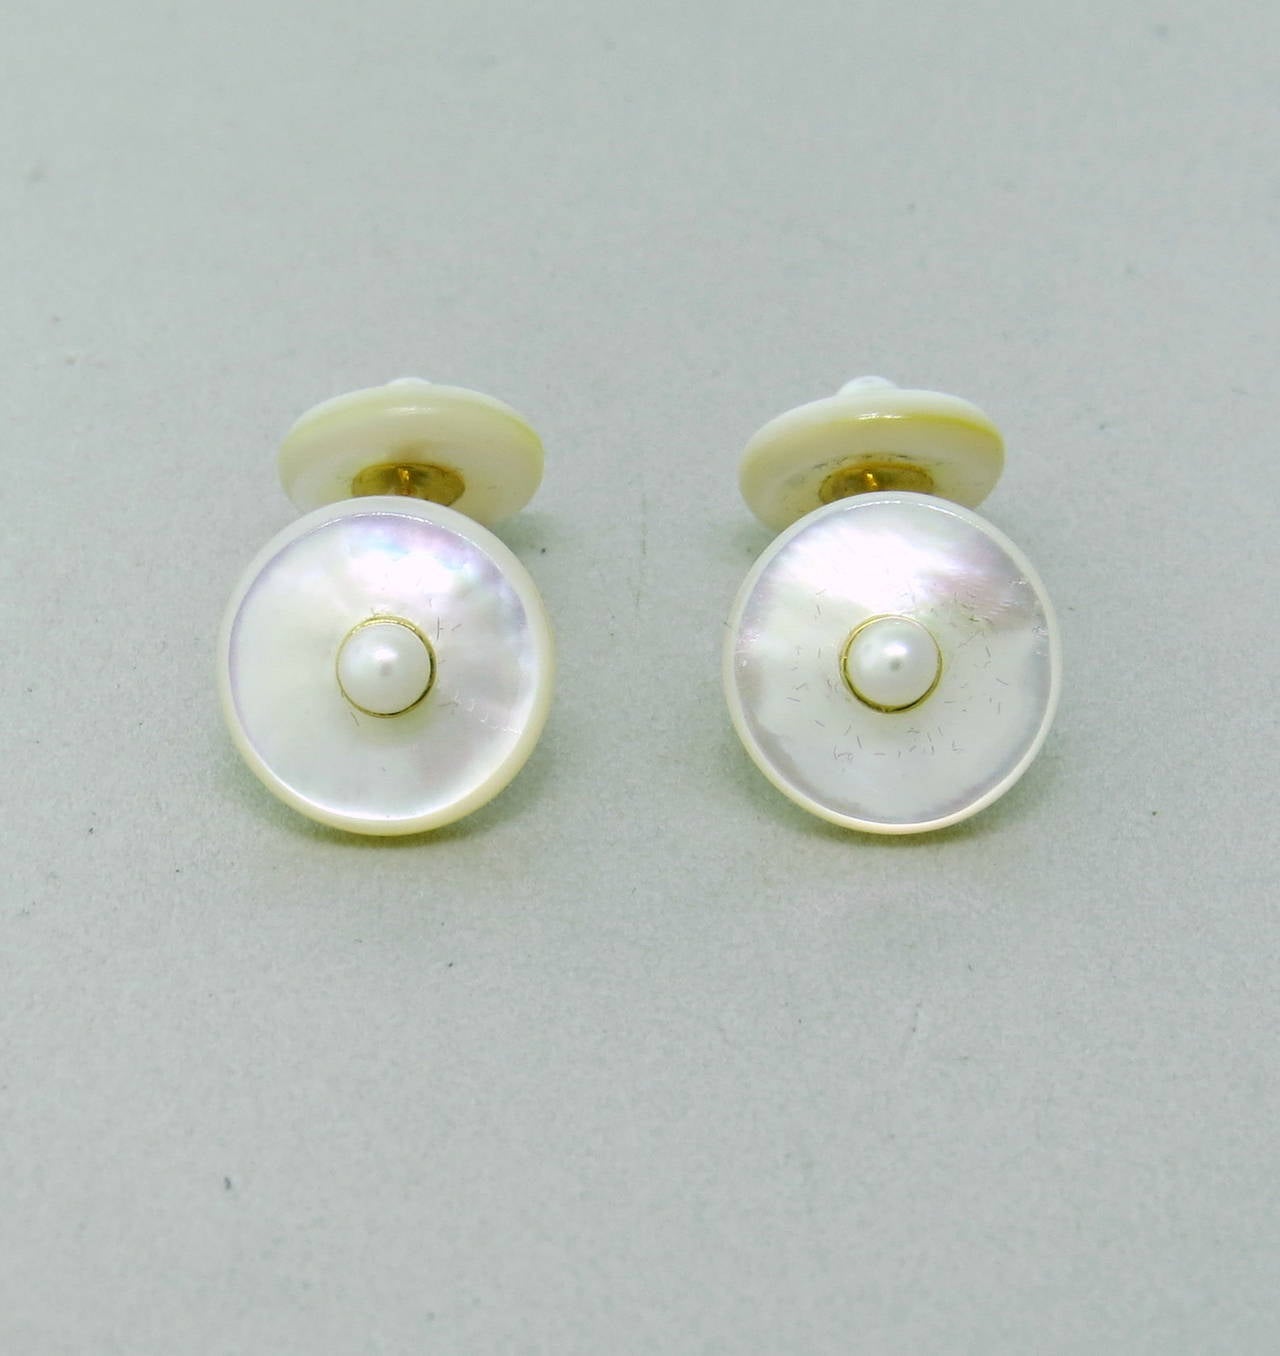 18k gold cufflinks by Trianon with mother of pearl top and pearl in the center. Top is 13.2mm in diameter, back is 11mm in diameter. weight - 5.6gr